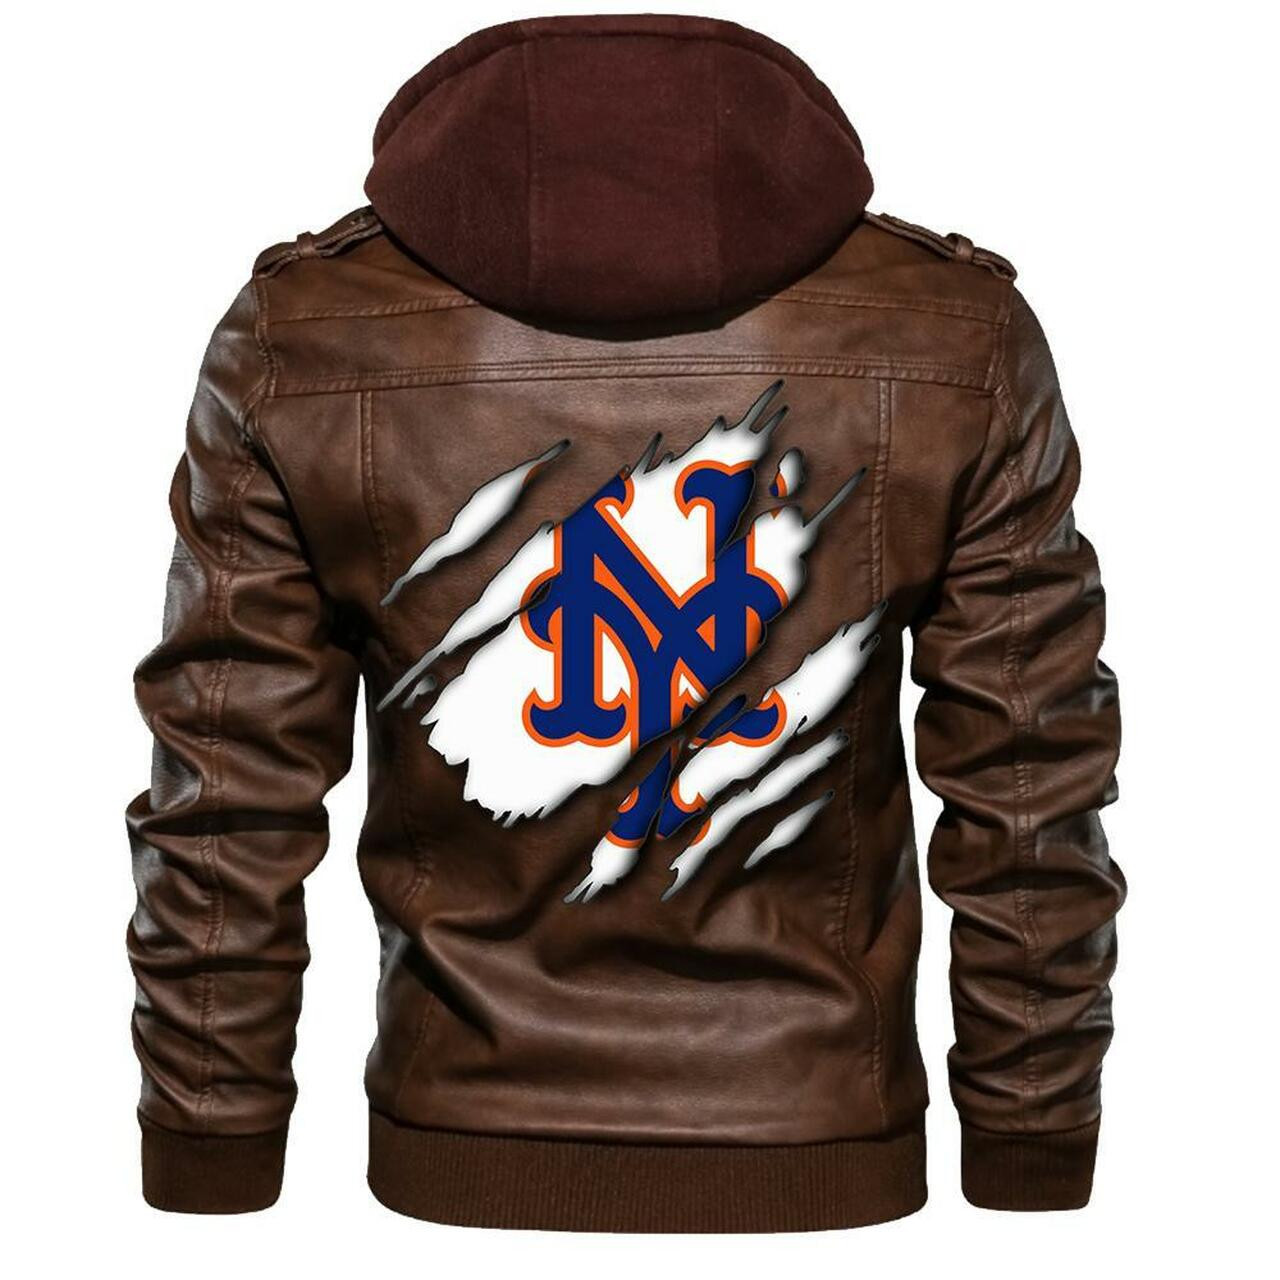 Are you looking for a great leather jacket? 217